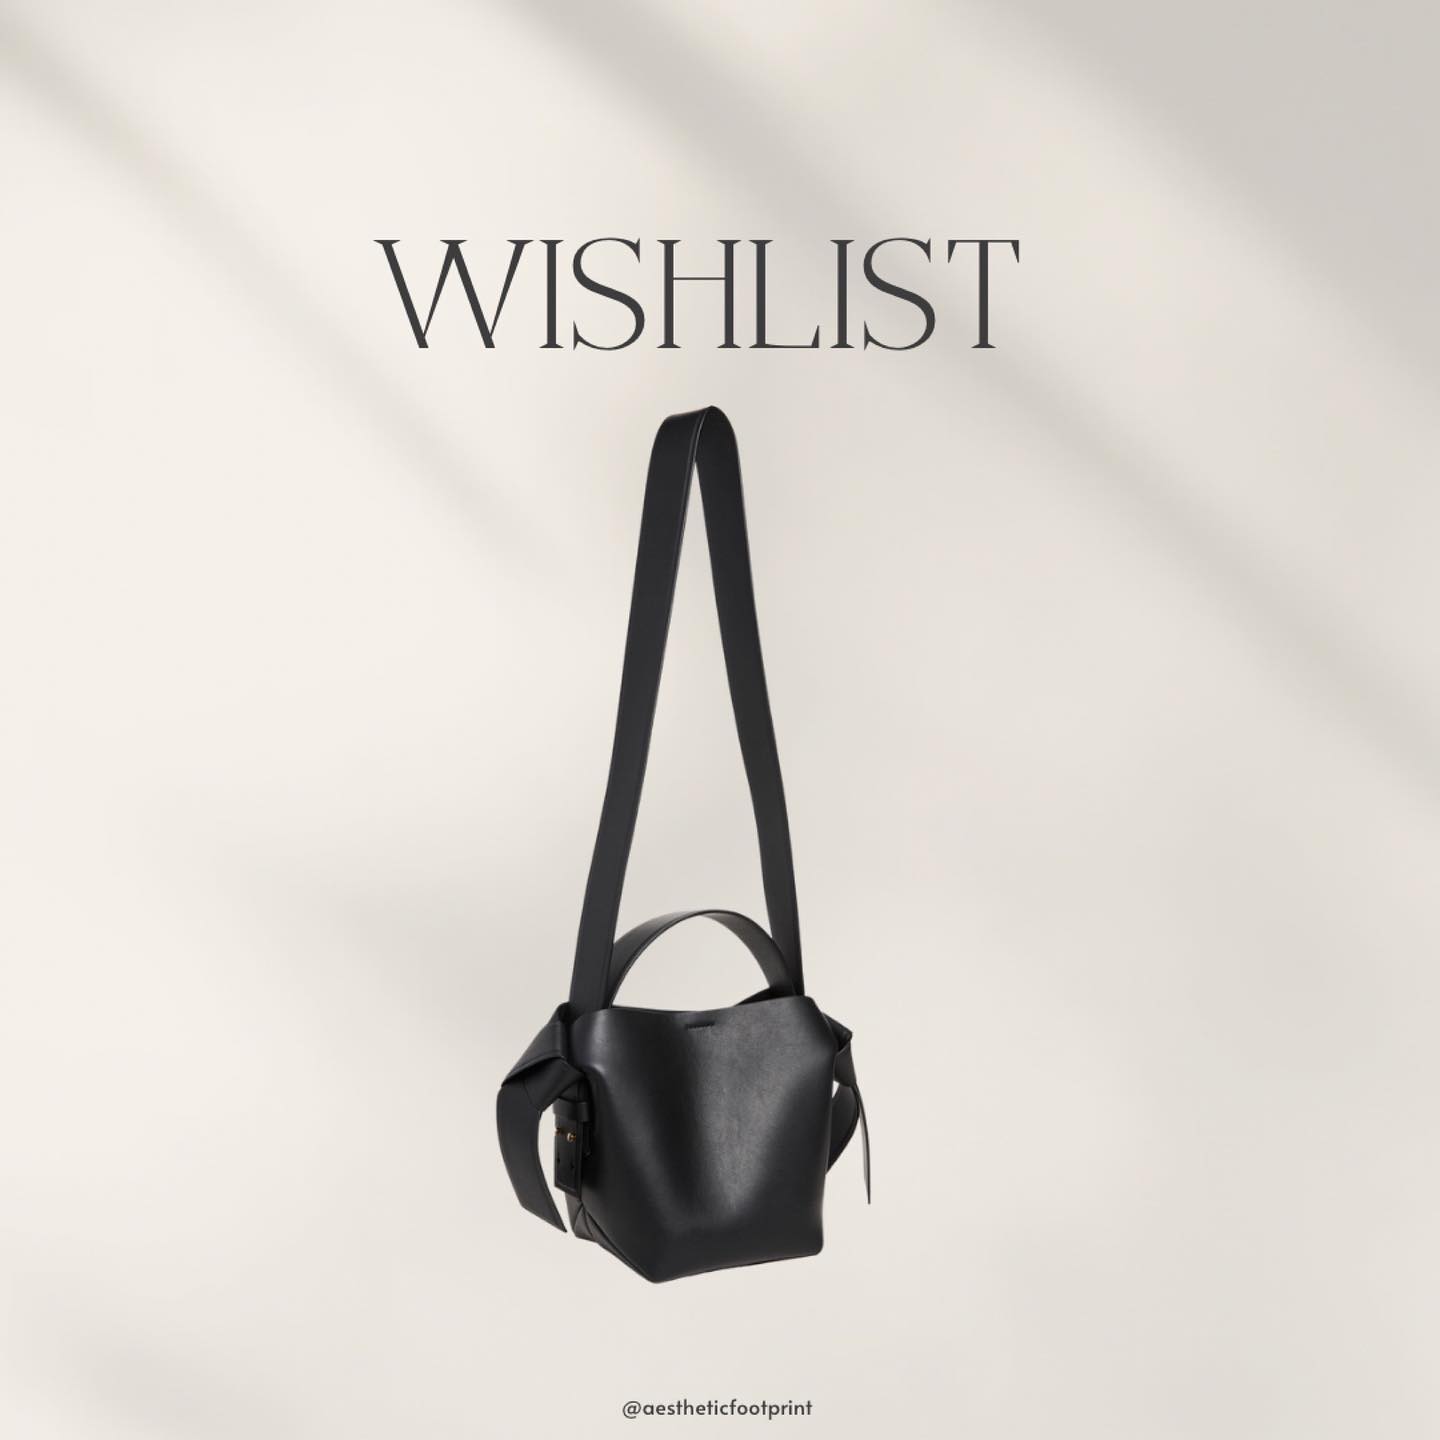 An understated, minimal everyday purse. Love both the short handle and crossbody options 

Follow my shop @aestheticfoot